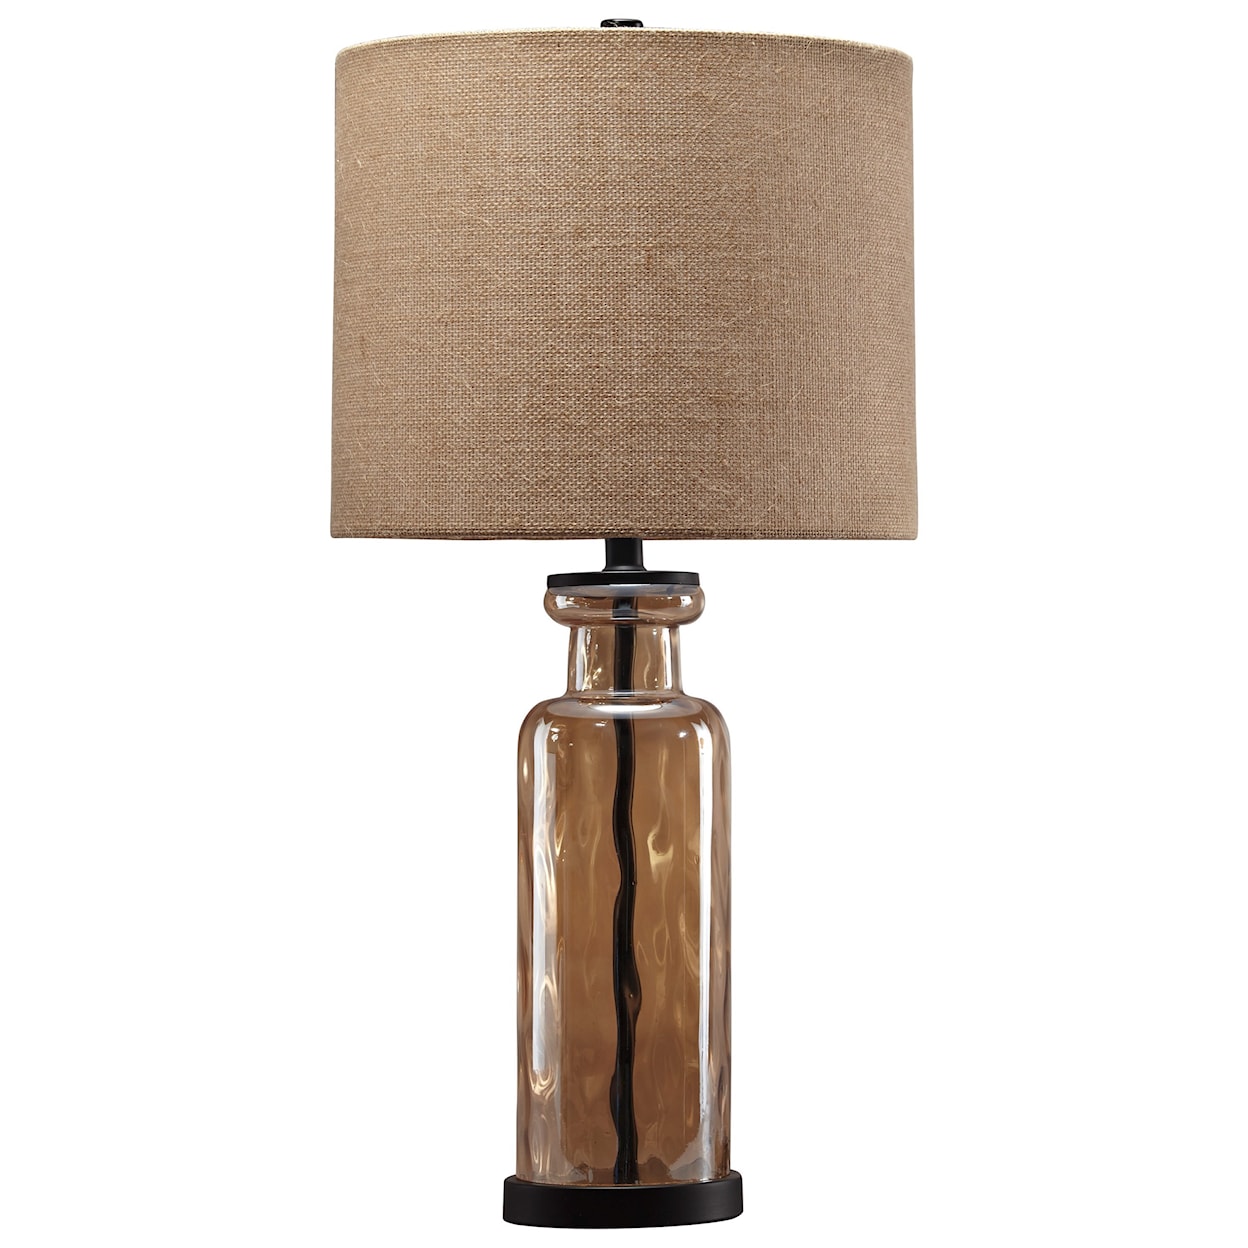 Signature Design by Ashley Lamps - Vintage Style Laurentia Champagne Glass Table Lamp